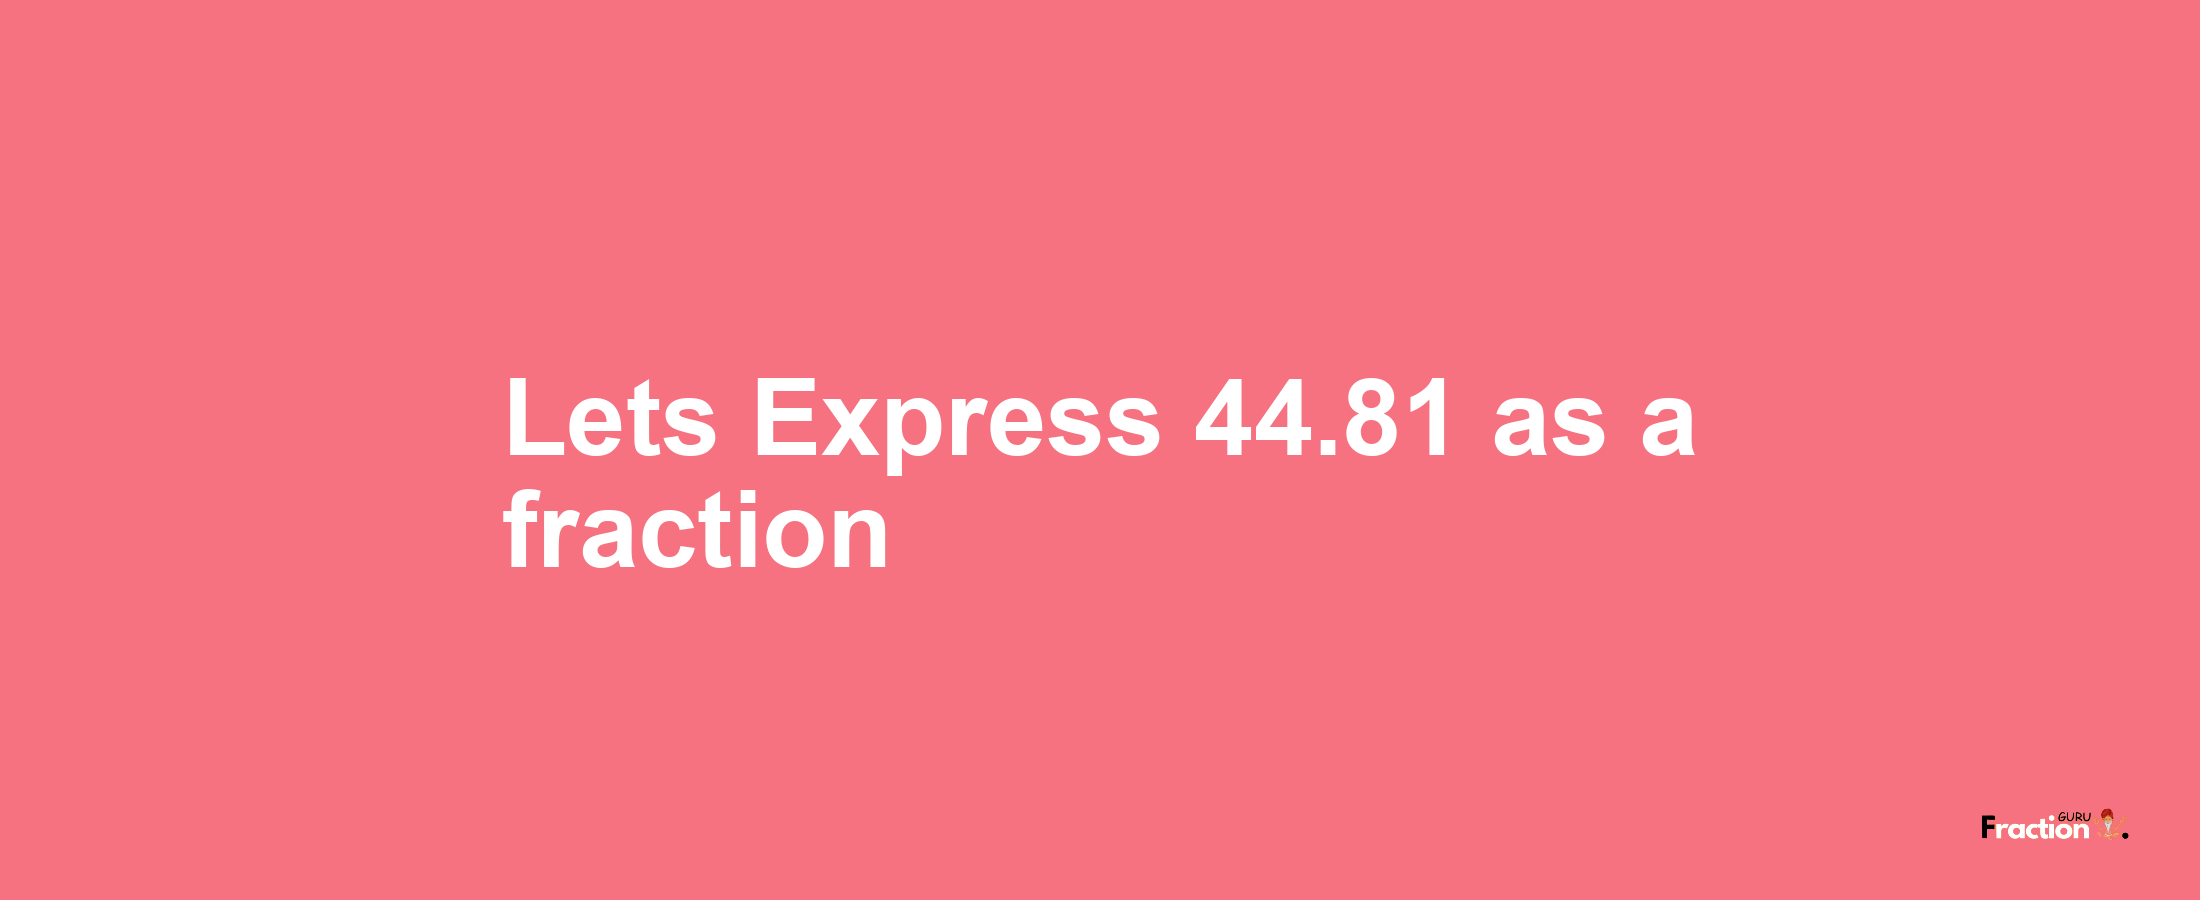 Lets Express 44.81 as afraction